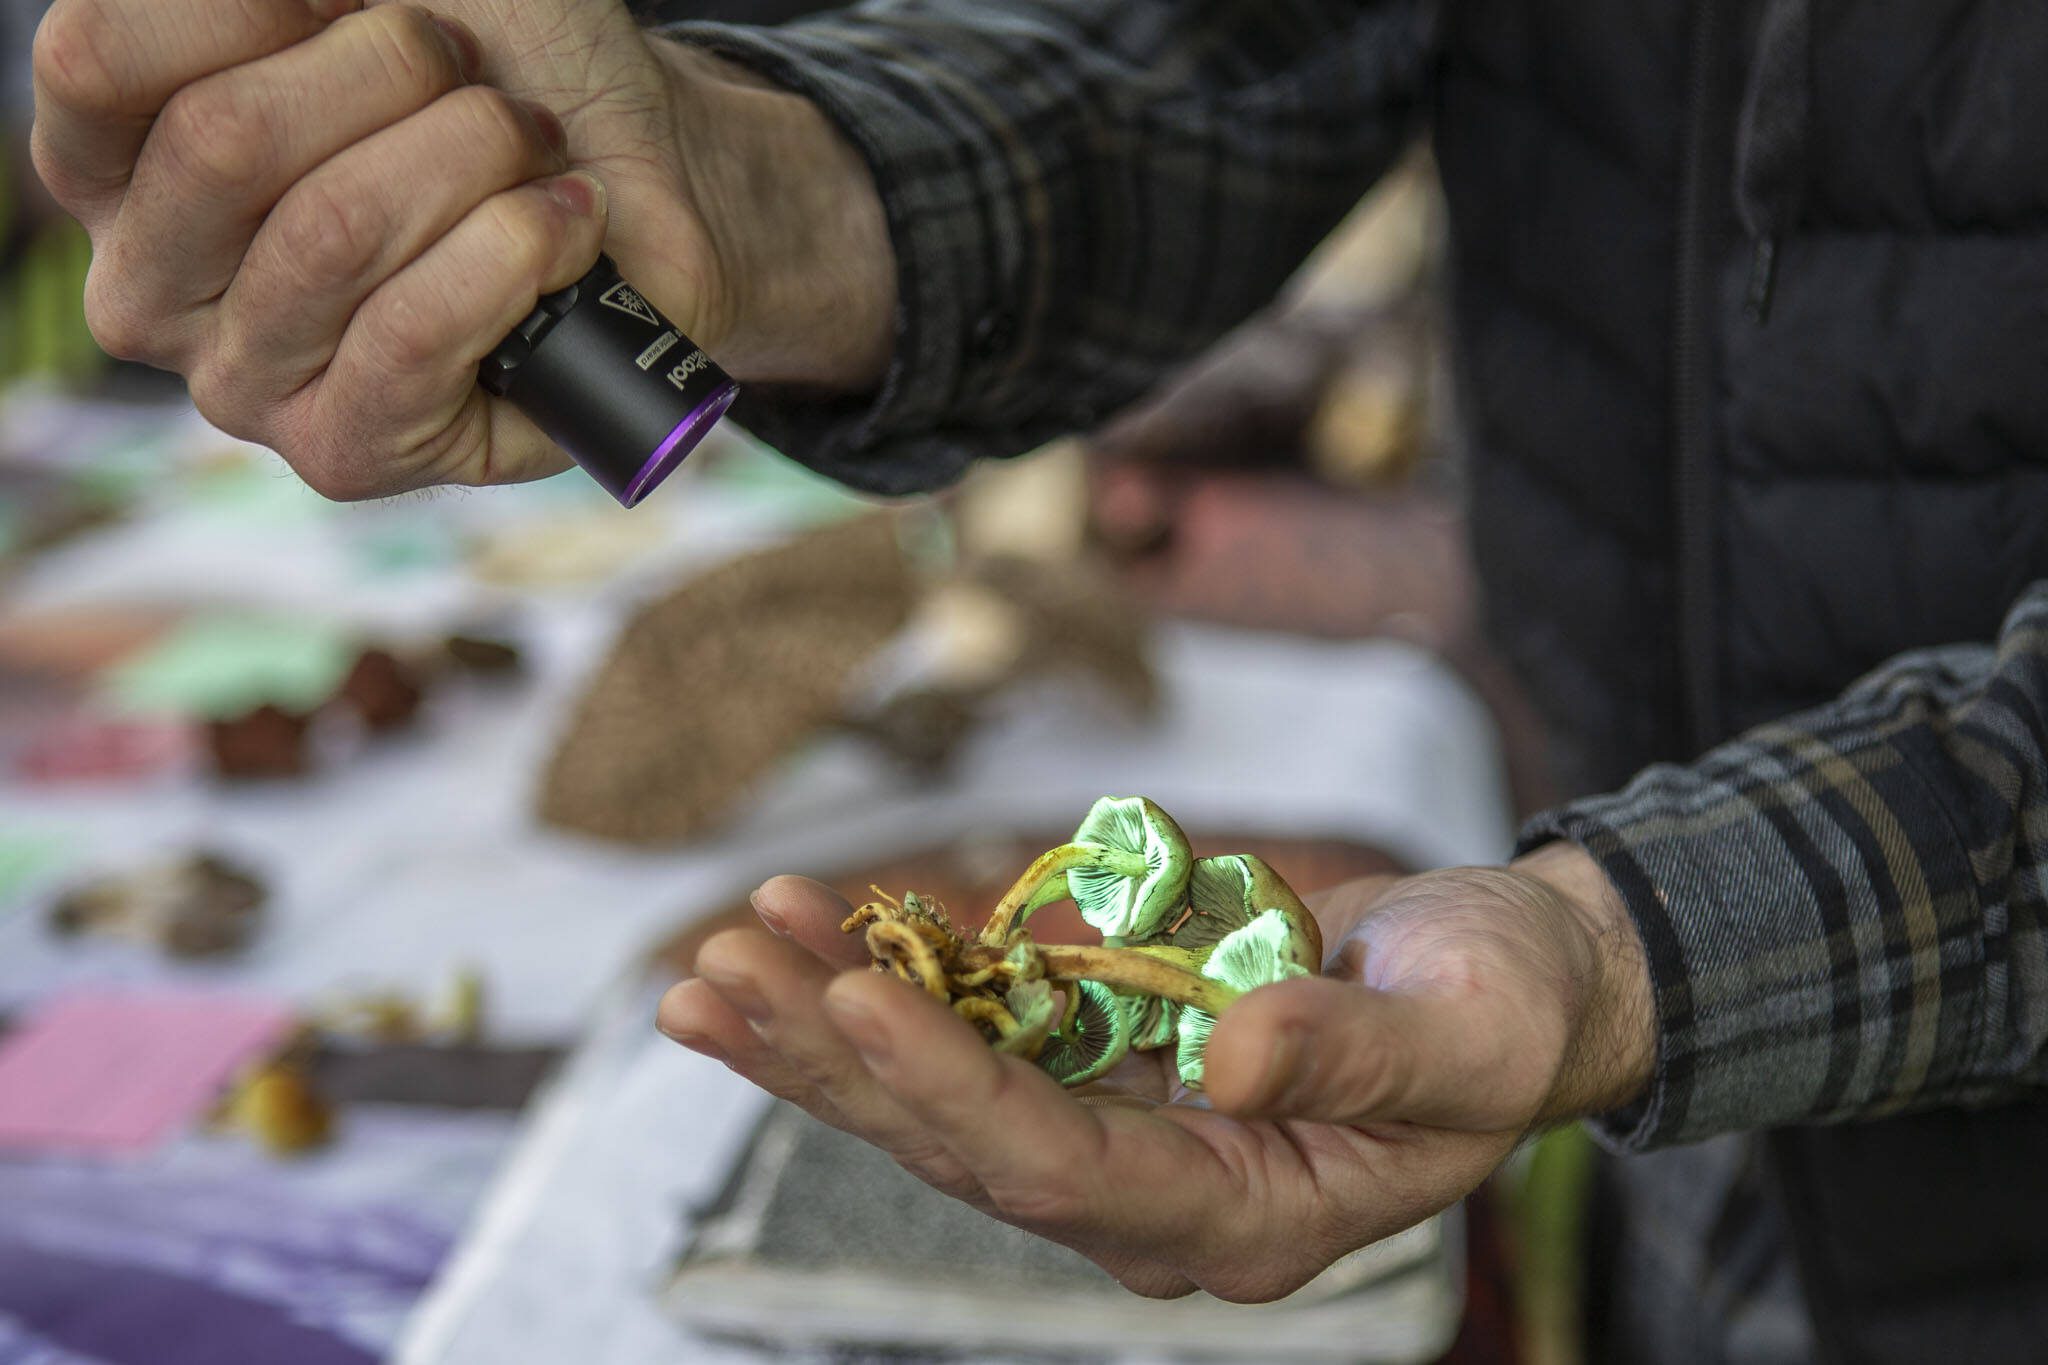 Travis Furlanic shows the fluorescent properties of sulfur tuft mushrooms during a Whidbey Wild Mushroom Tour at South Whidbey Tilth Farmers Market on Saturday, April 27, 2024 in Langley, Washington. (Annie Barker / The Herald)